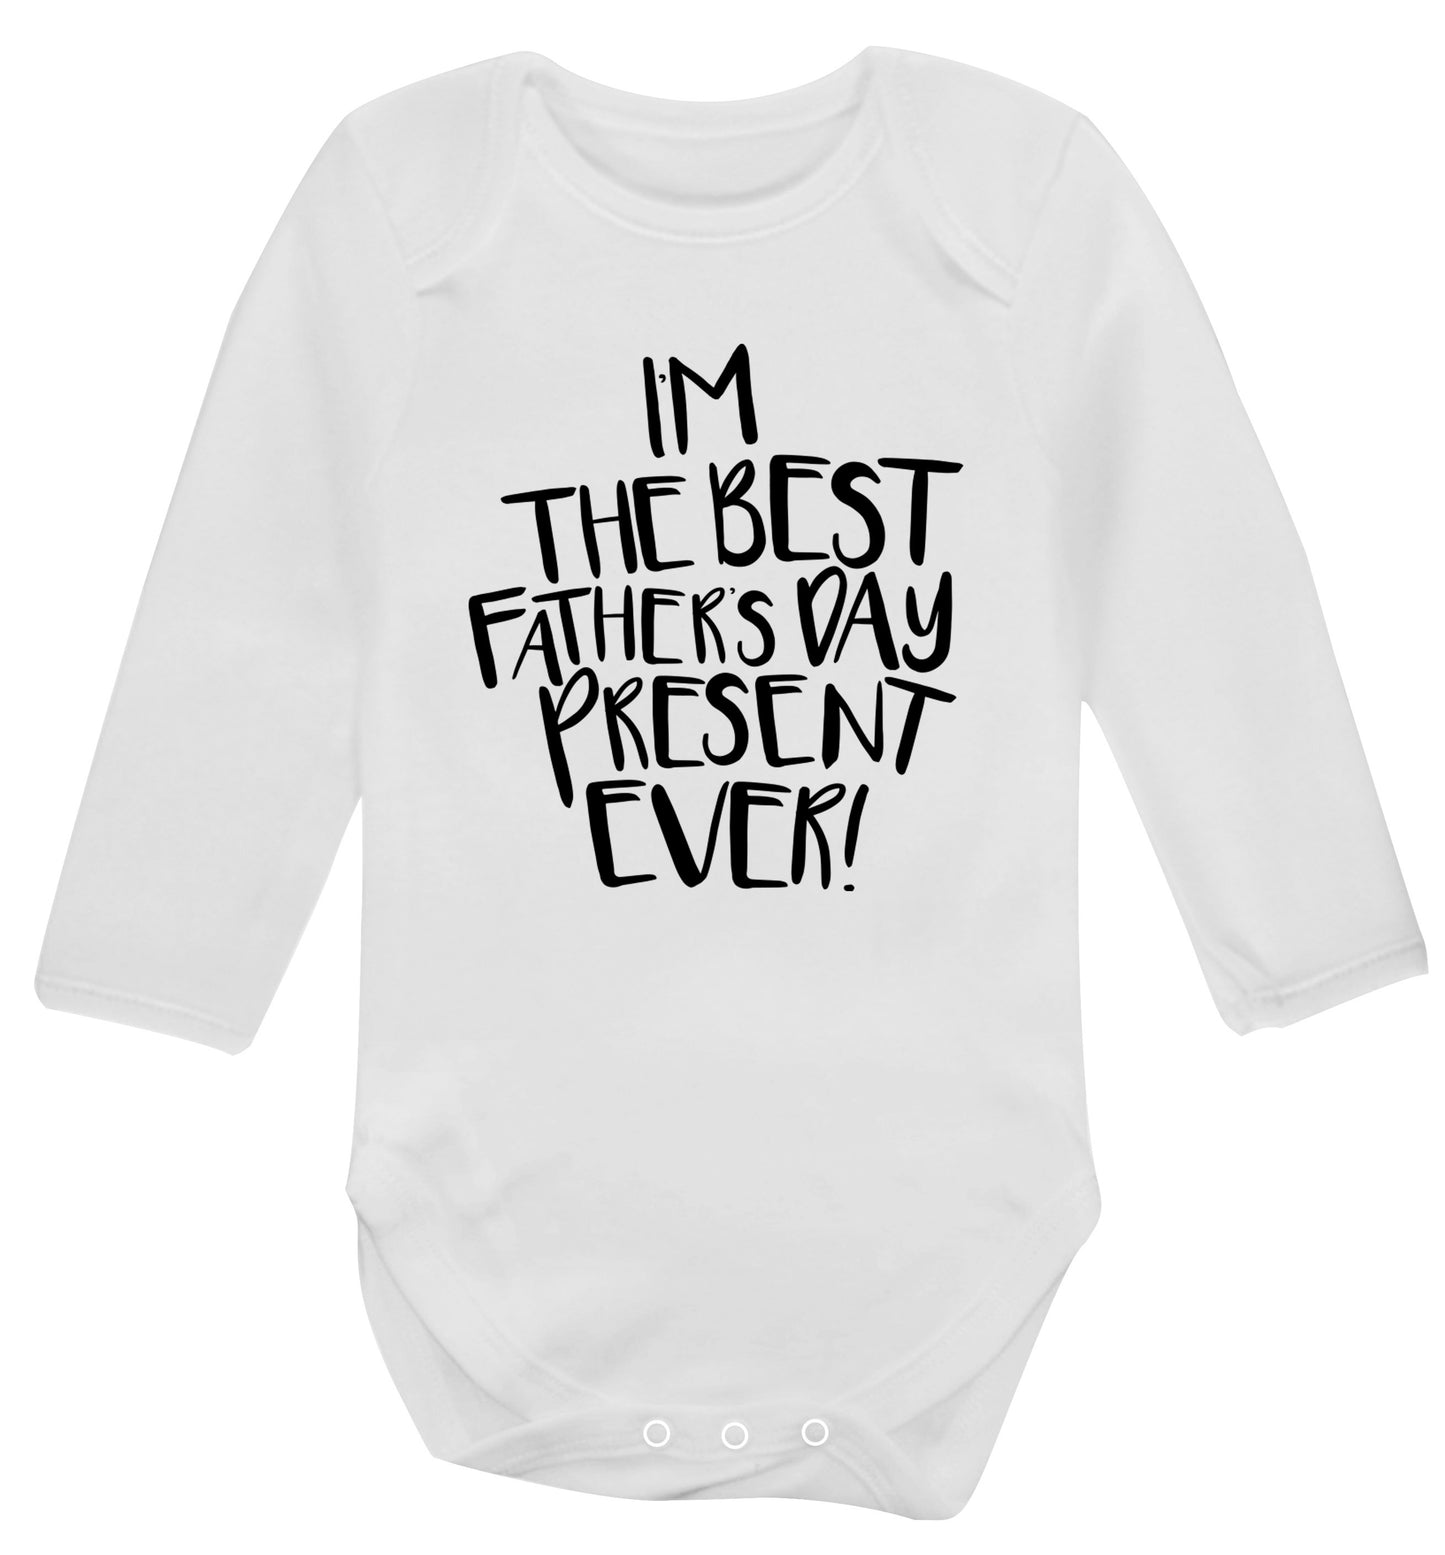 I'm the best father's day present ever! Baby Vest long sleeved white 6-12 months